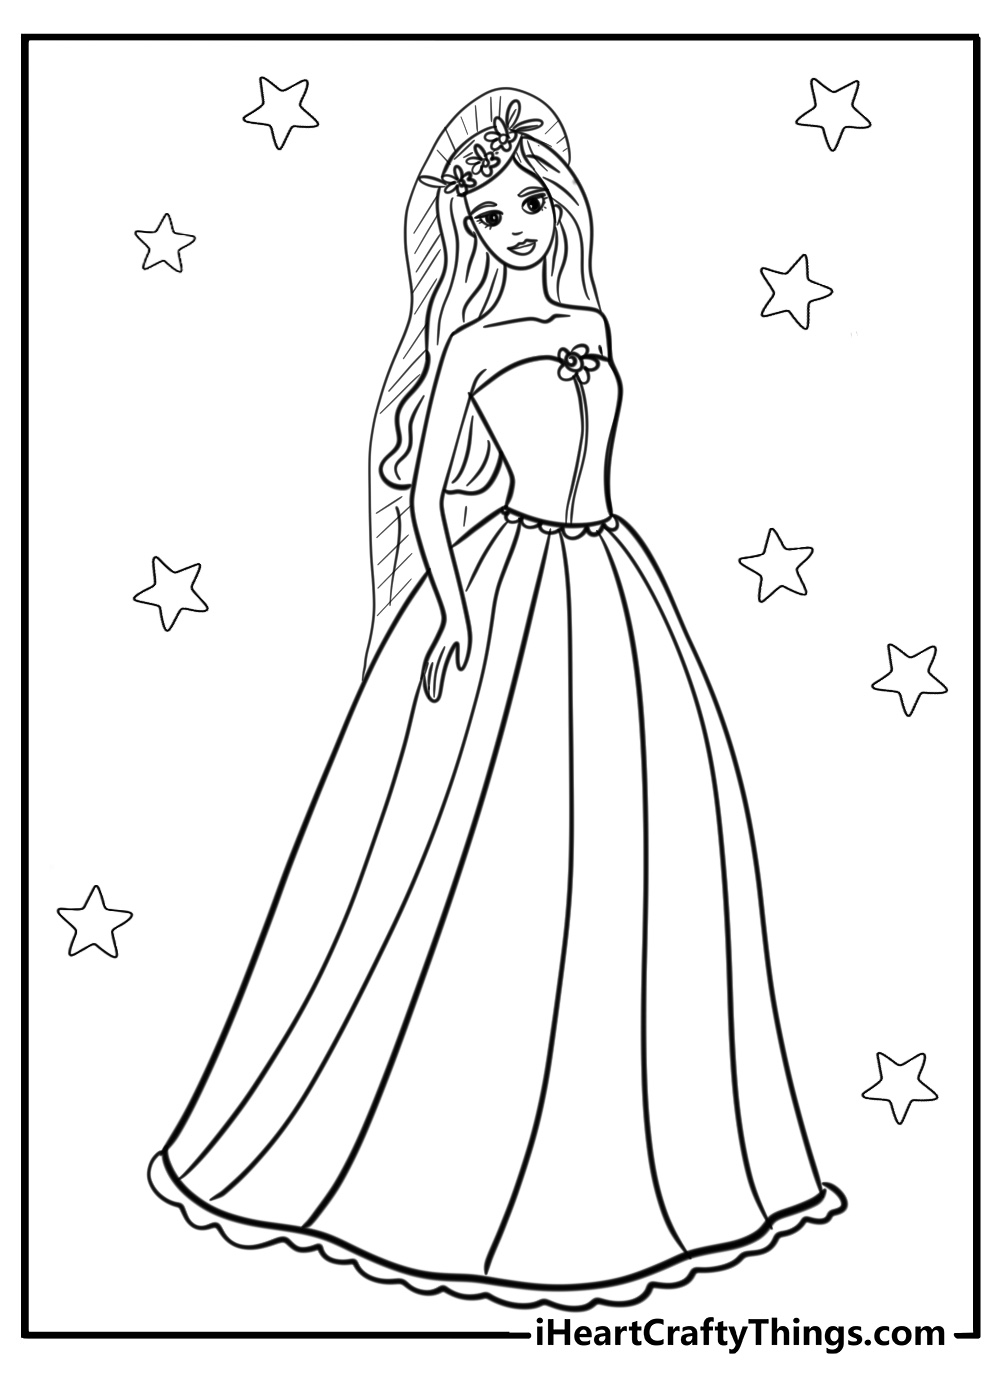 Bride wearing simple dress coloring page with short veil